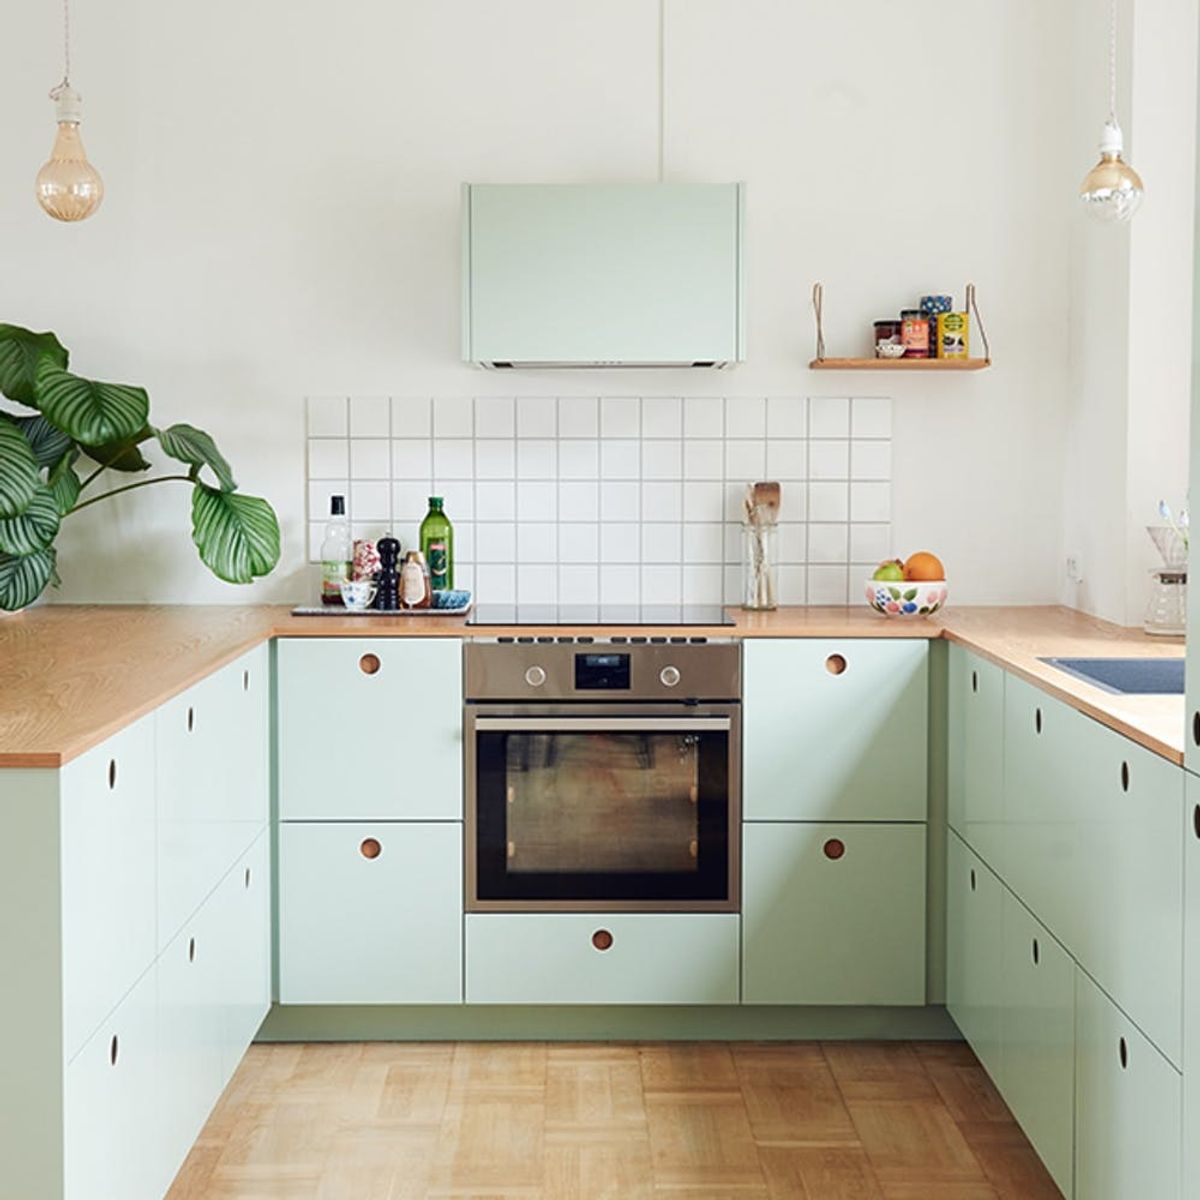 4 Reasons You Should Replace Your Kitchen Cabinets With Drawers